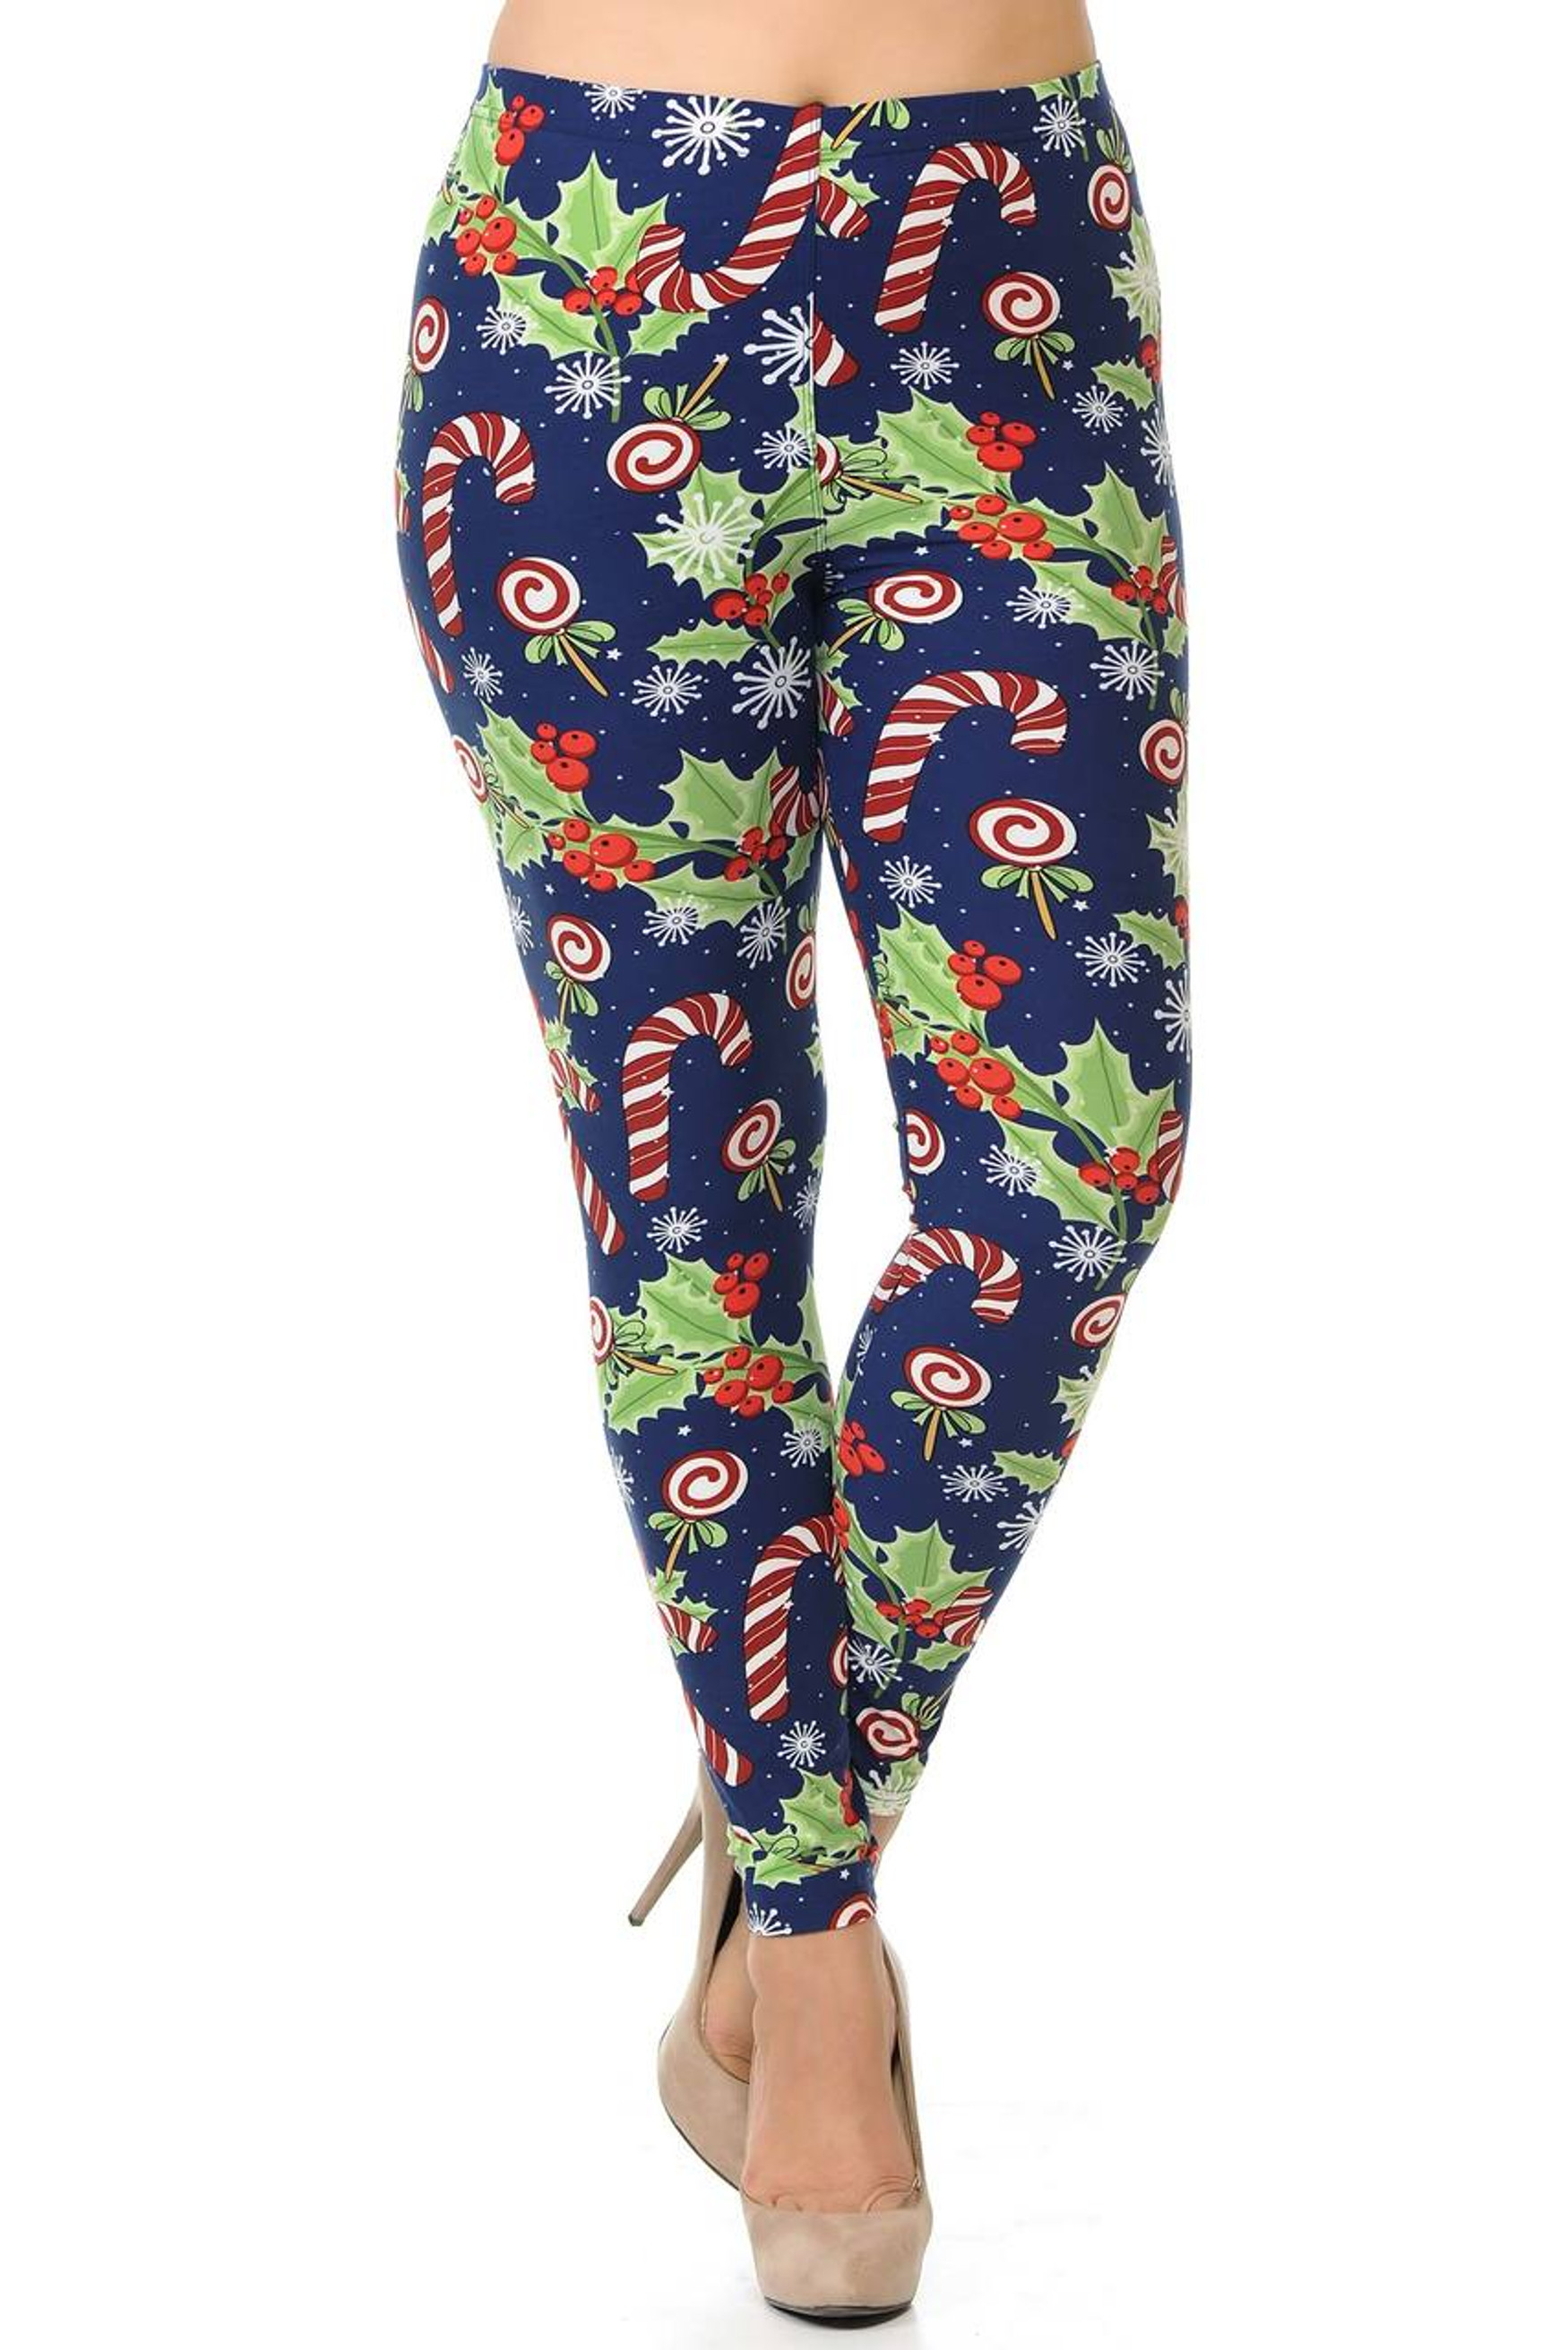 Buttery Soft Candy Cane Noel Holiday Plus Size Leggings